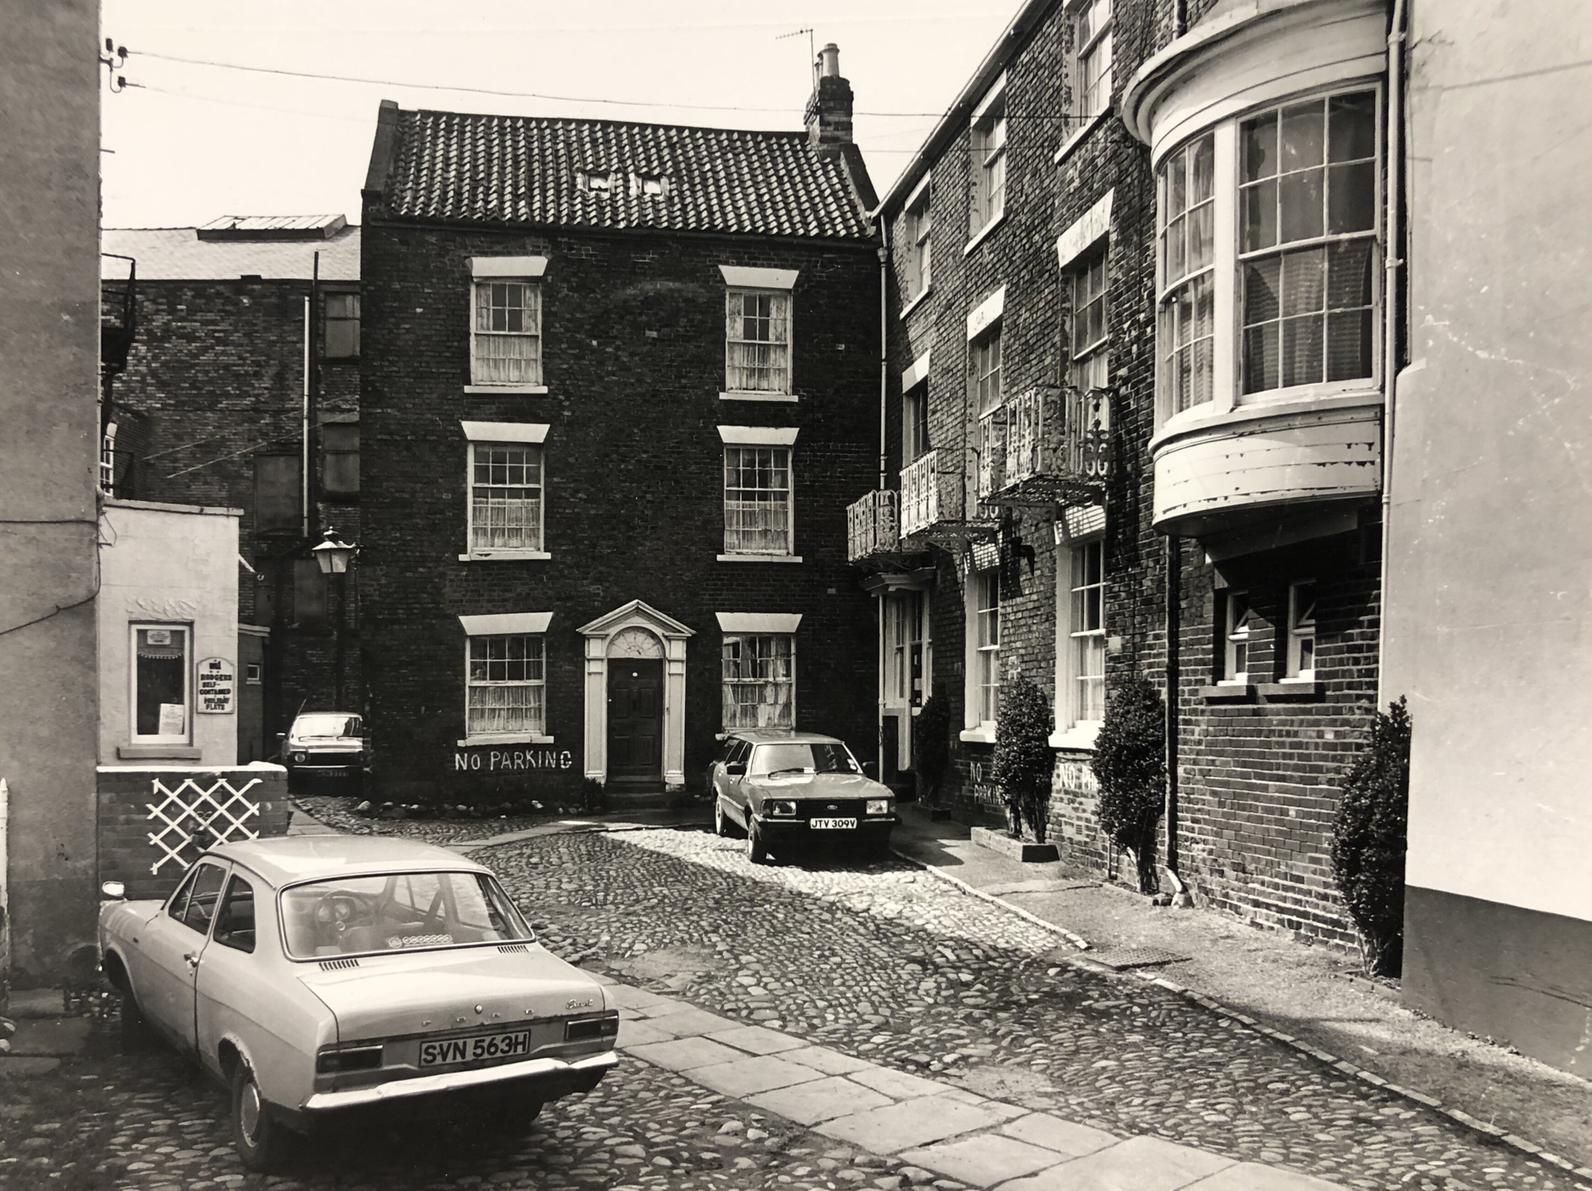 This photo is dated 1983 and was taken in Prospect Place, near Blands Cliff. The properties were part of The Bell Hotel.